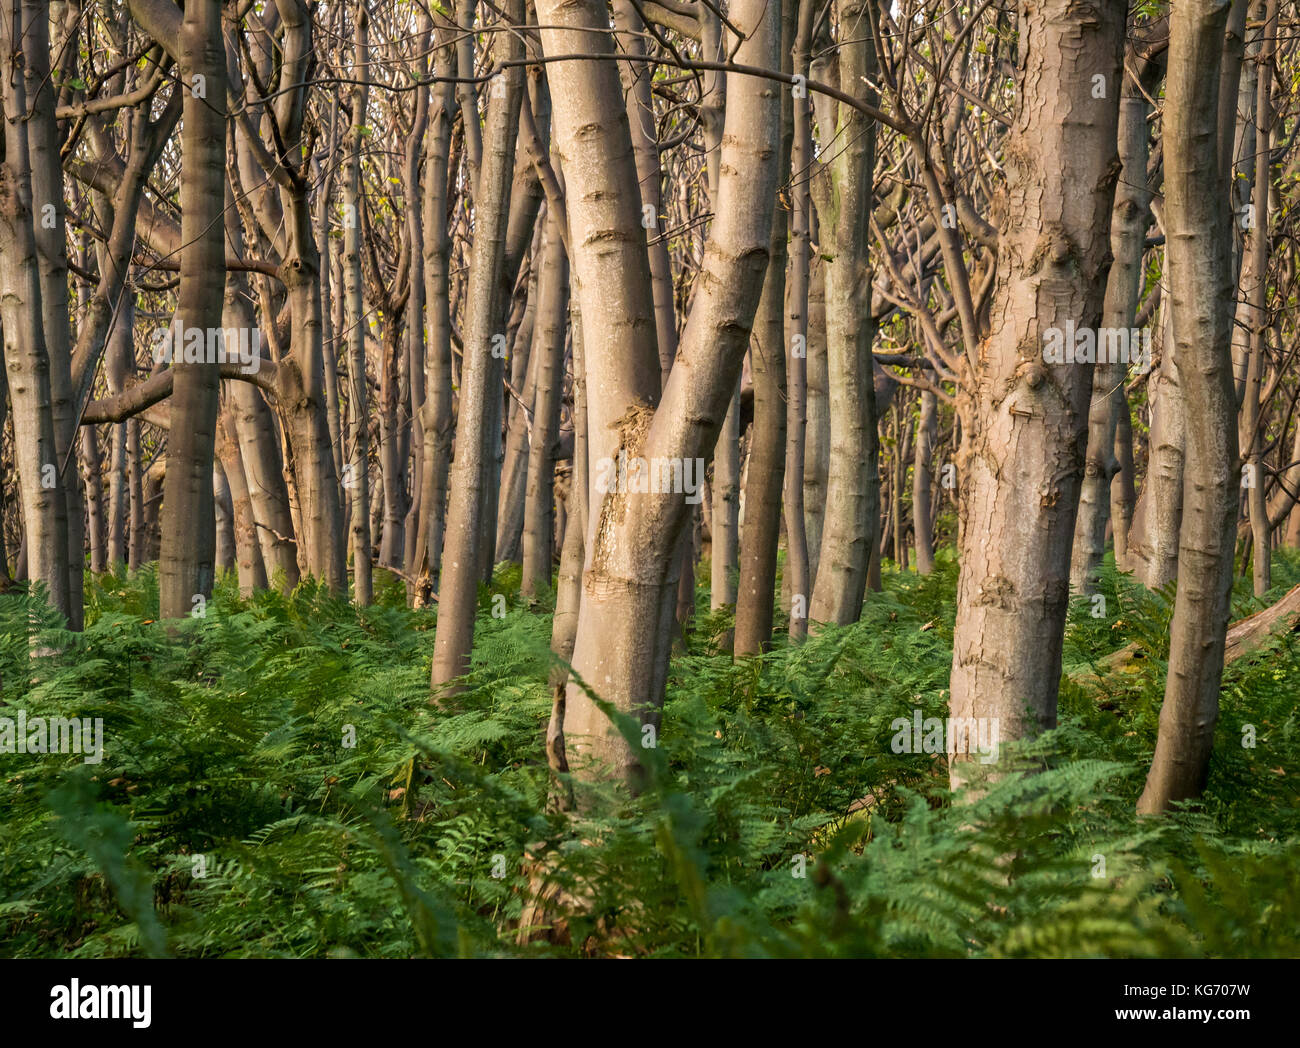 A dark thicket or wood of close growing smooth bark trees with high ferns and undergrowth, Scotland, UK Stock Photo